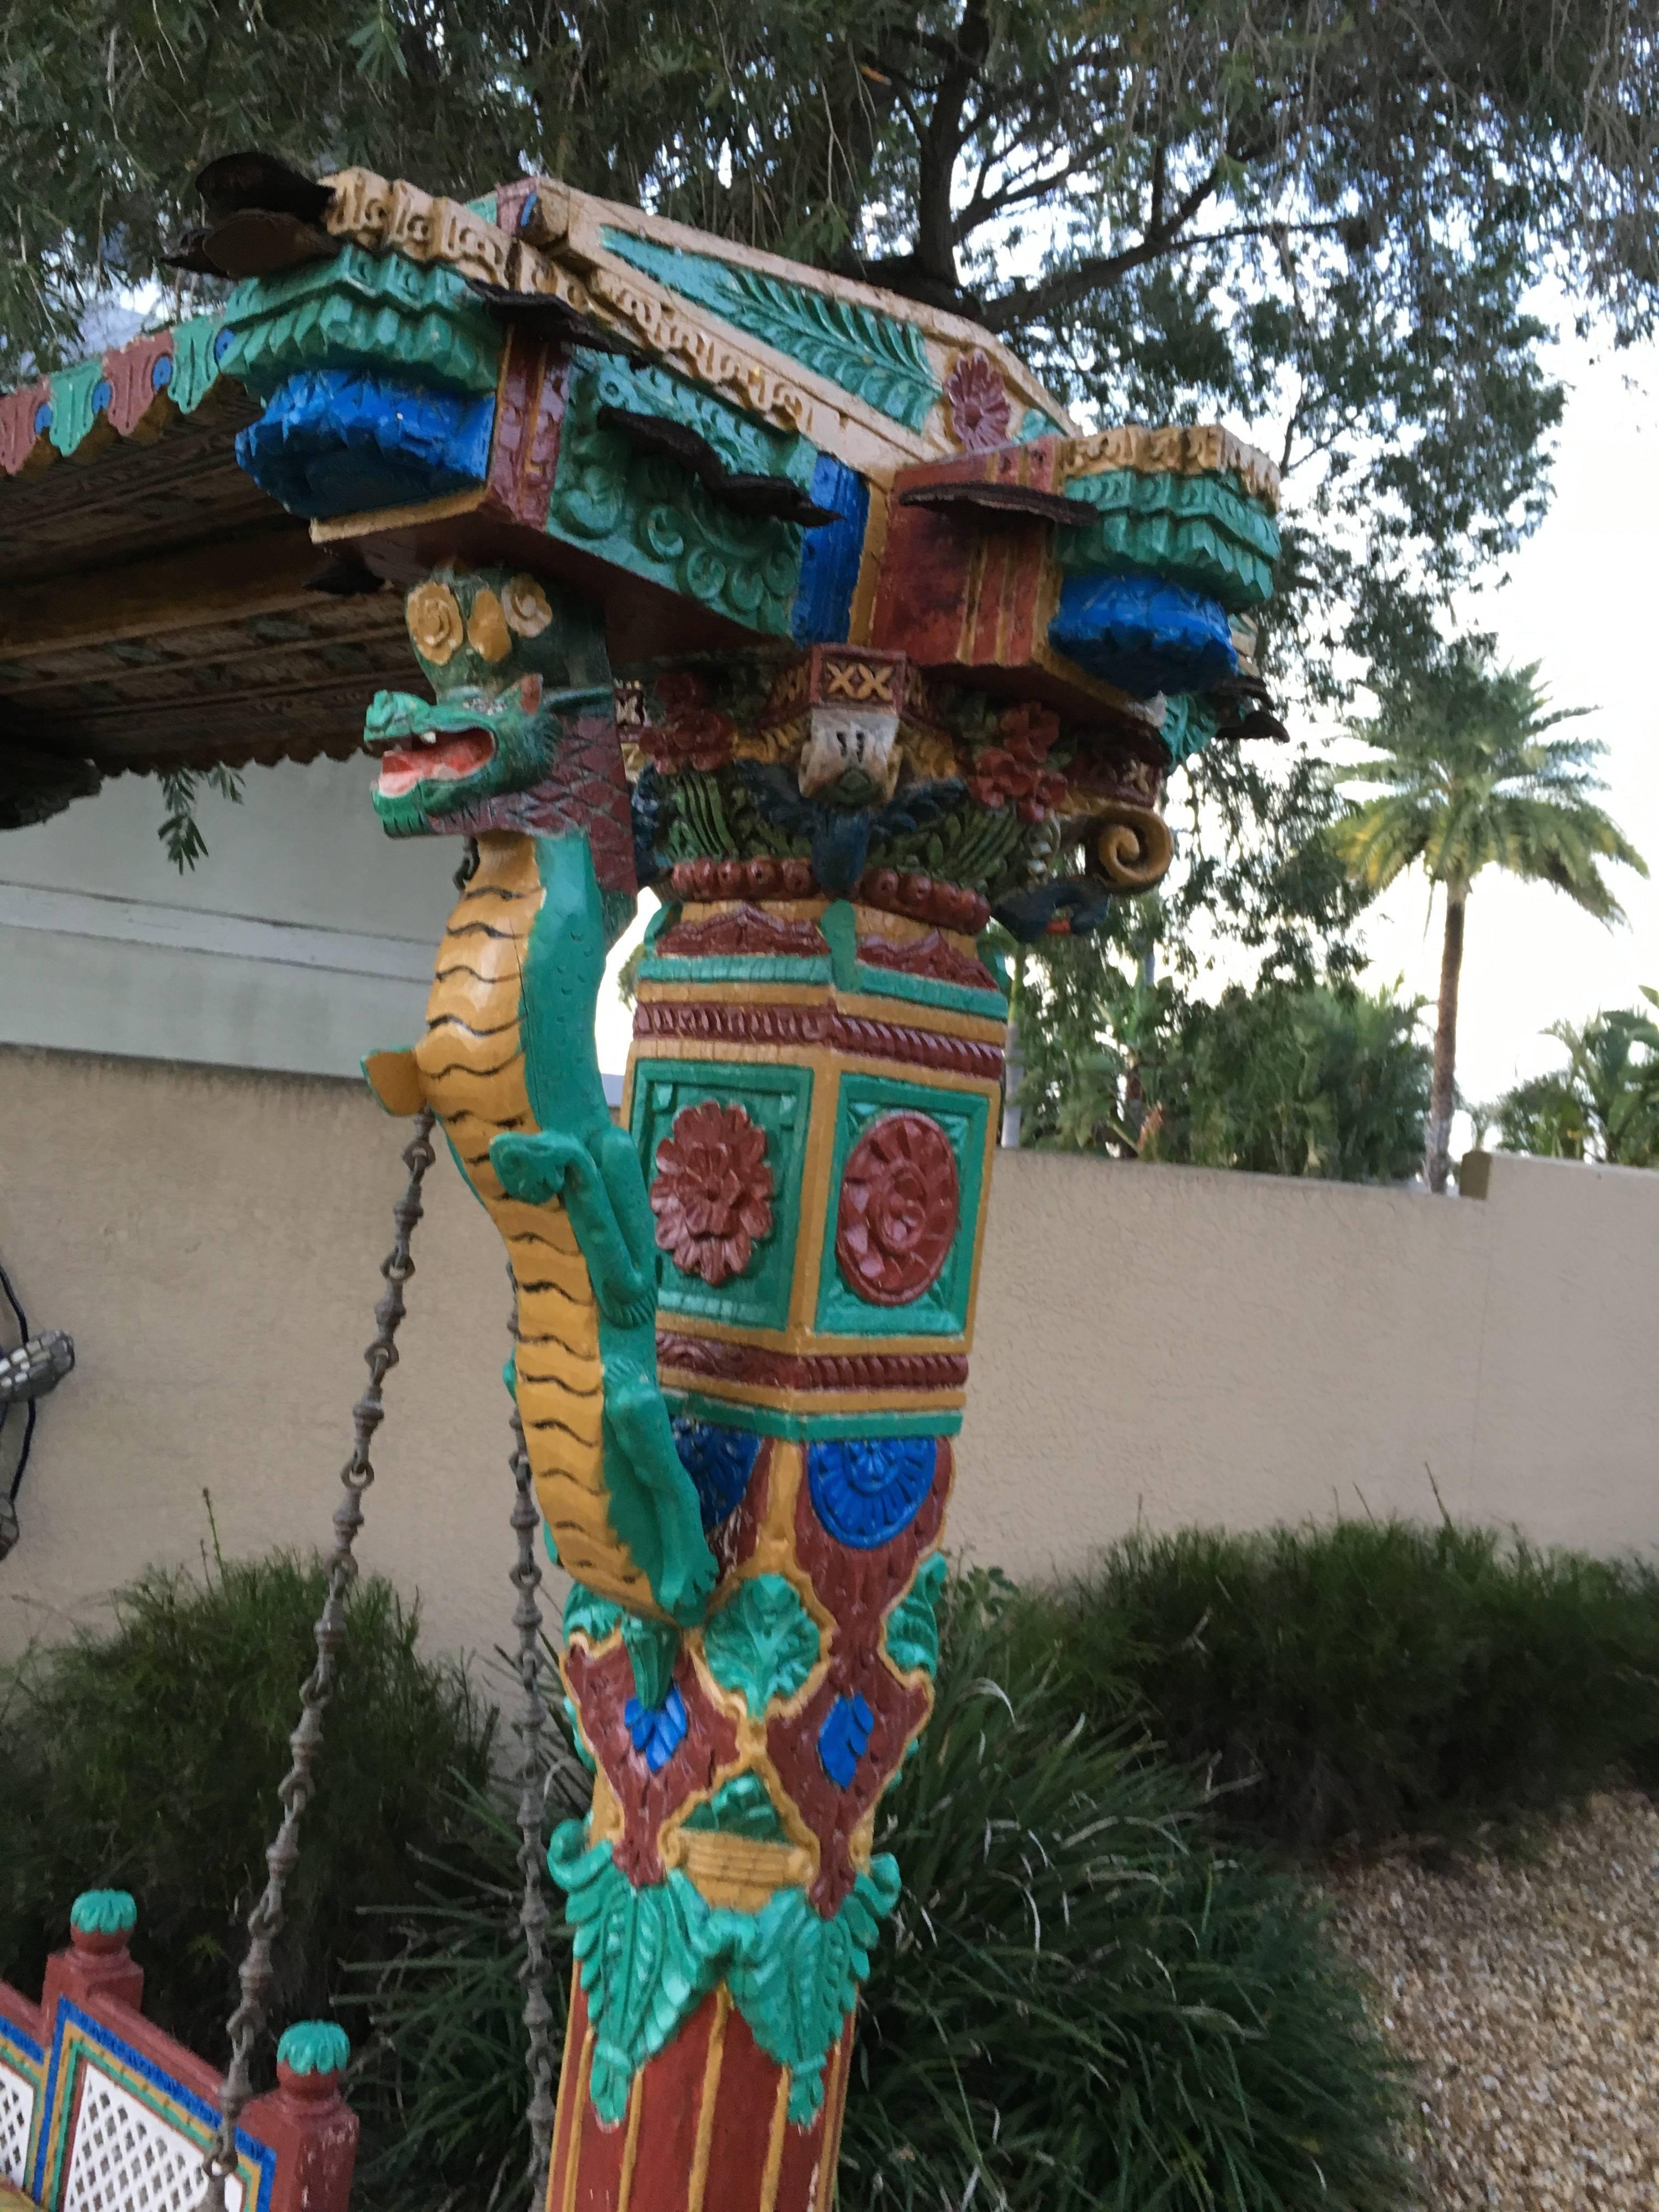 An Indian hand-carved, hand-painted teak royal jhula swing. Seats three. Very colorful and in wonderful condition for 500 years old.